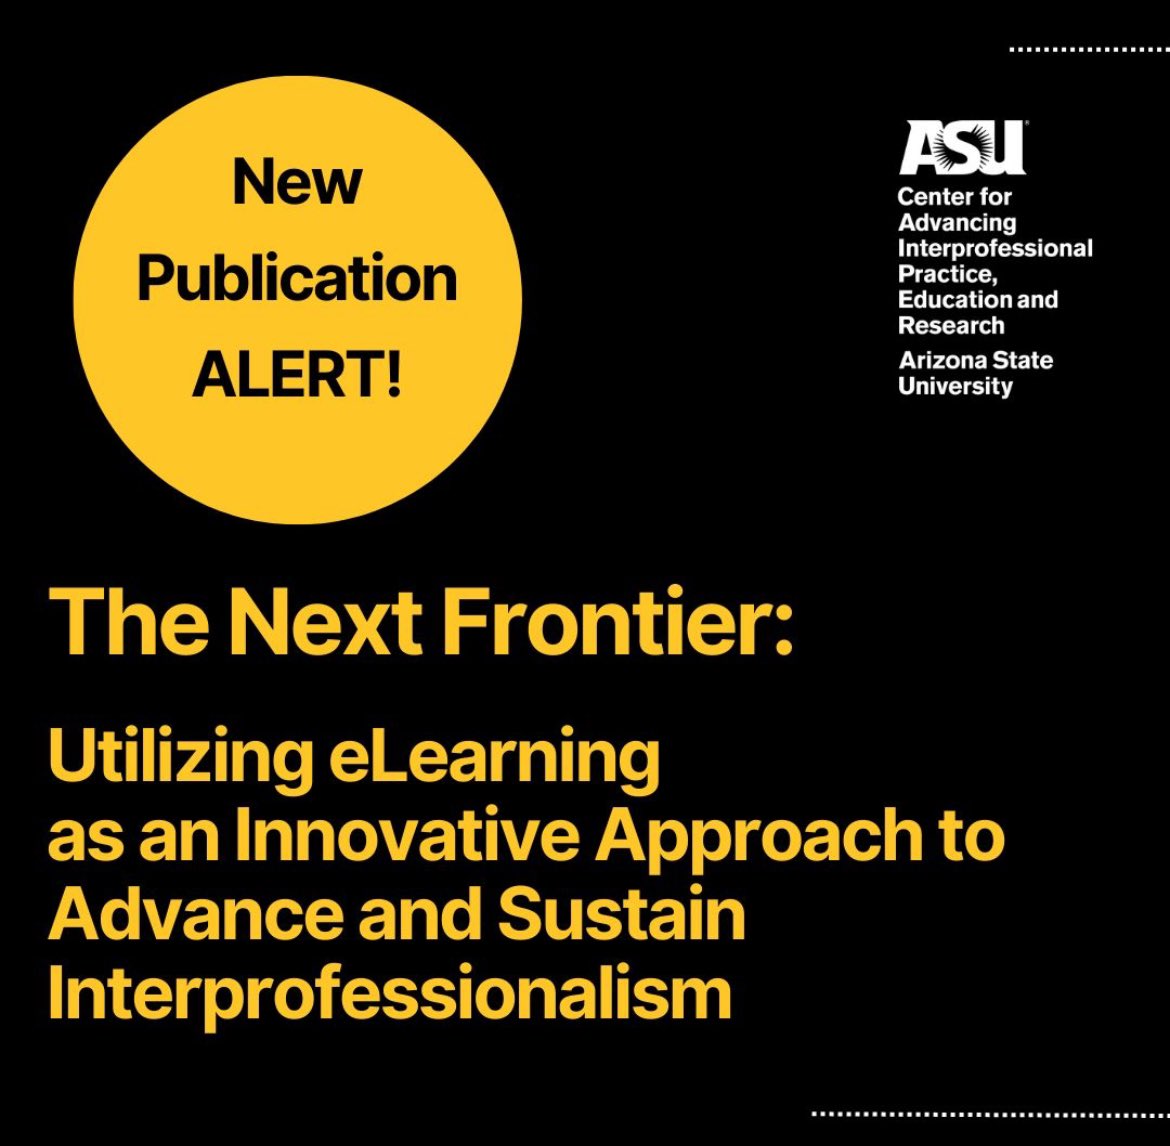 New Publication!! from the @asucaiper Team! We are excited to share, “The Next Frontier: Utilizing #eLearning as an Innovative Approach to Advance and Sustain #Interprofessionalism”~ Link to article: tandfonline.com/eprint/8Y5VVTZ… @asunursing @ASU @CAIPERBhEATLab